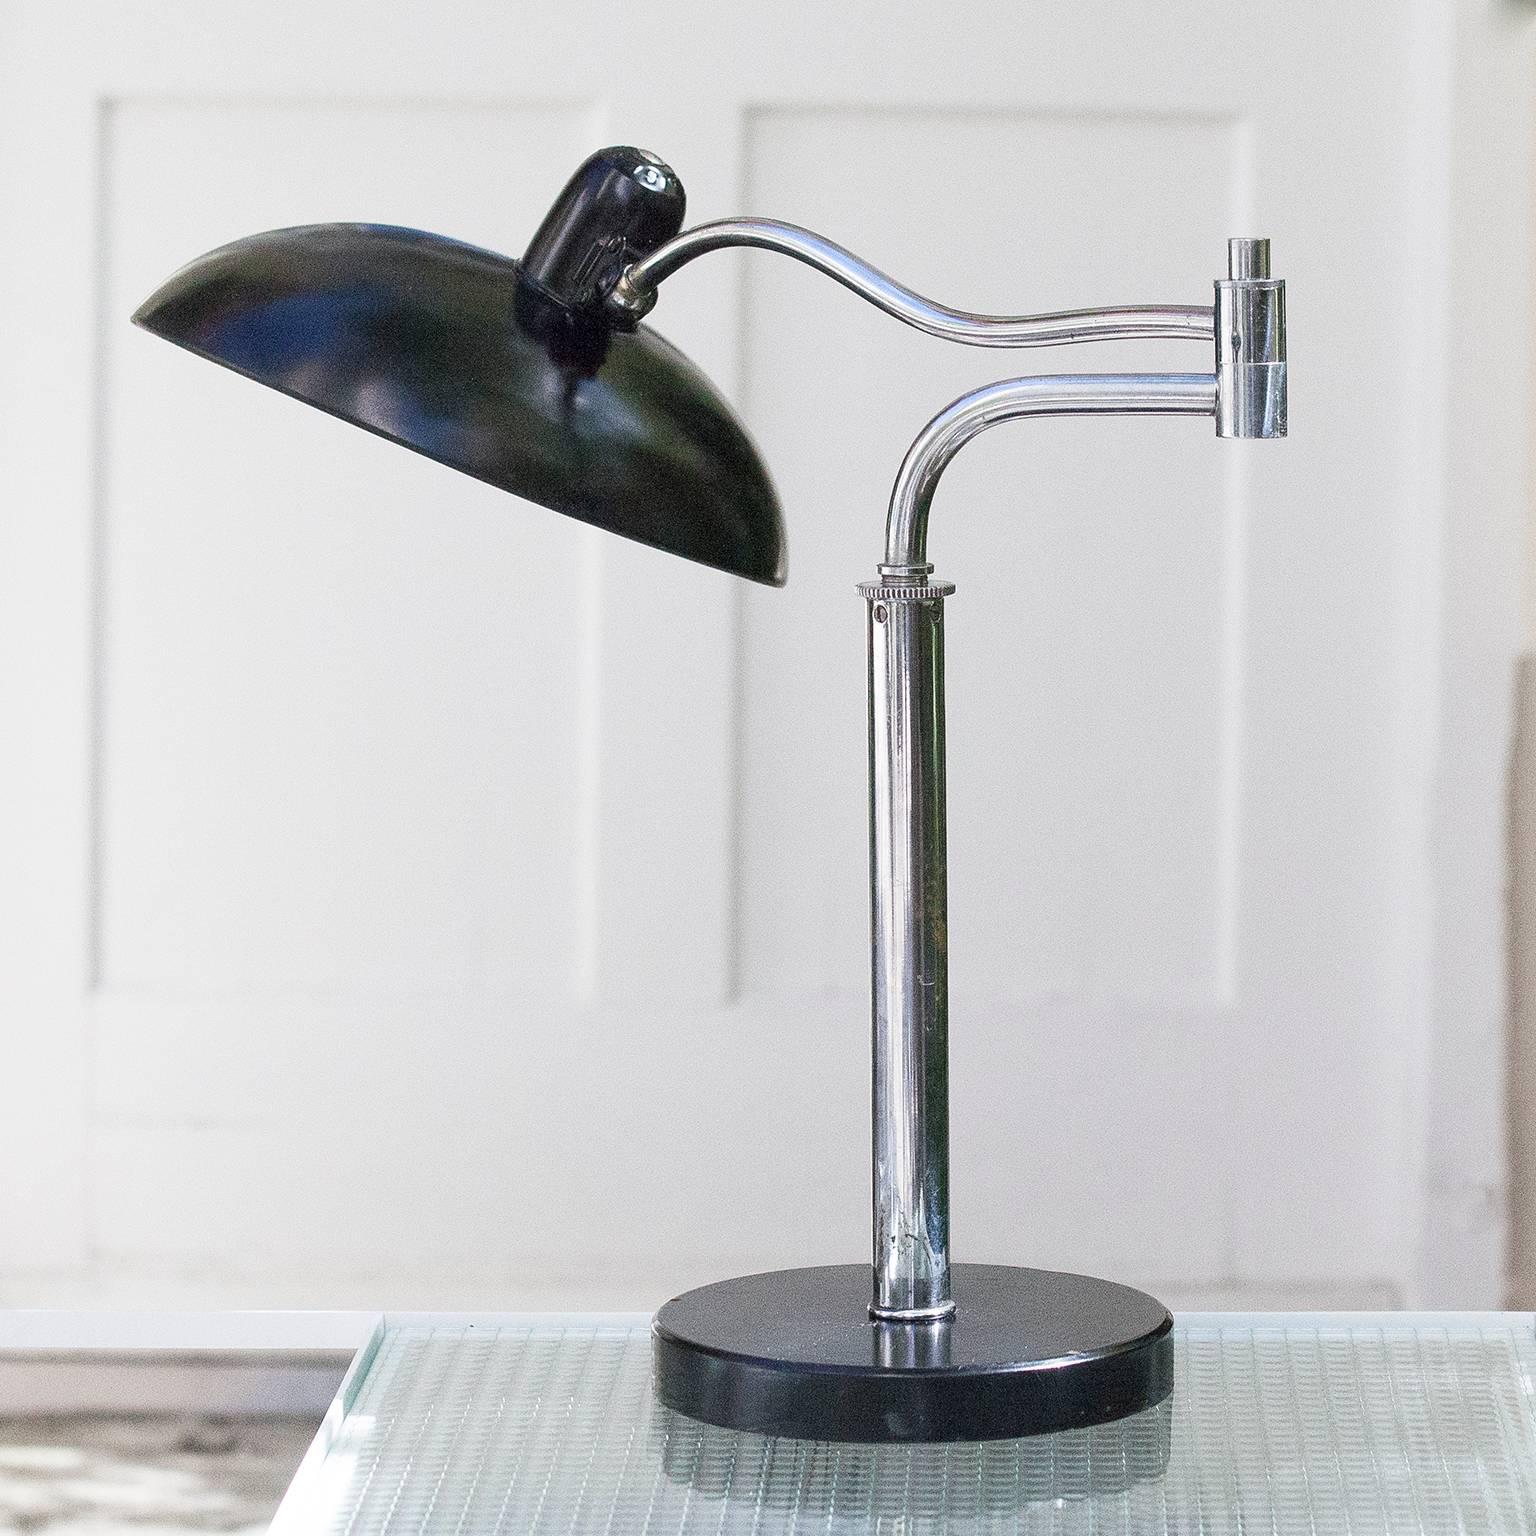 Very rare Bauhaus table lamp mod. 6651 by Christian Dell for Kaiser and Co., Neheim-Hüsten, Germany.
Design and execution of the 1930s.
Black lacquered and chromed metal, bakelite switch.
Height-adjustable, rotatable and can be swivelled through